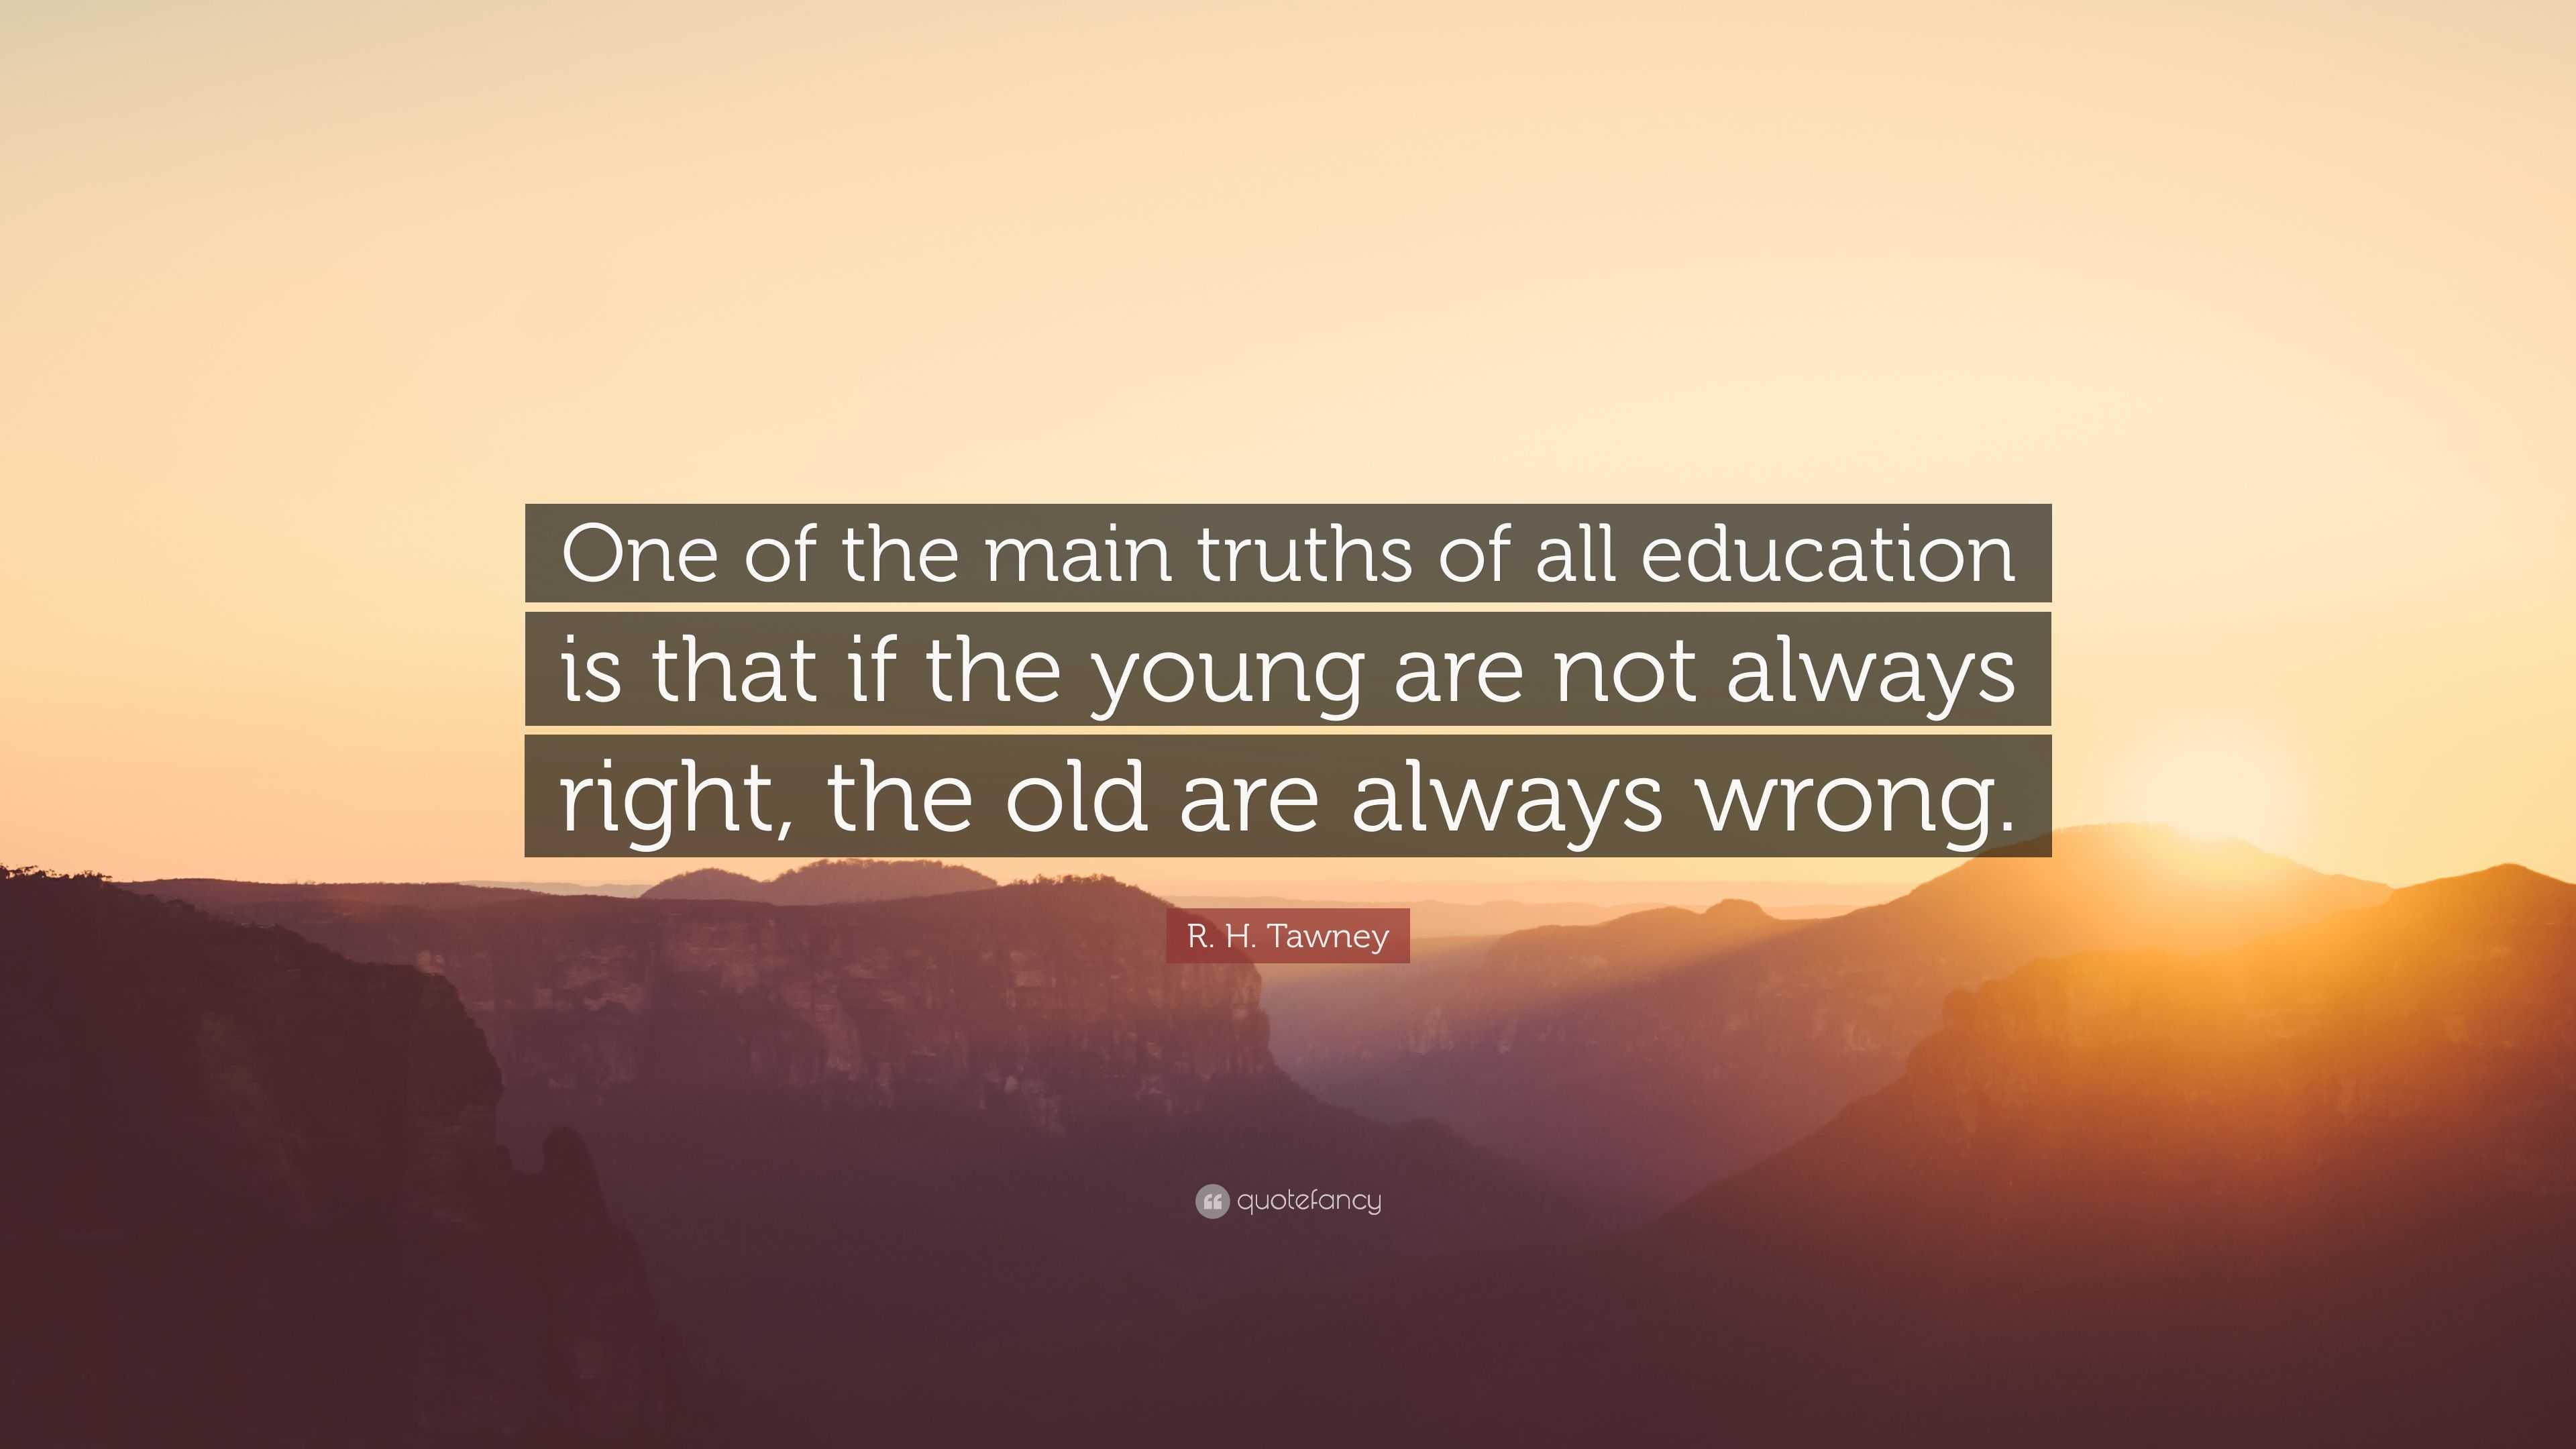 3974890-R-H-Tawney-Quote-One-of-the-main-truths-of-all-education-is-that.jpg